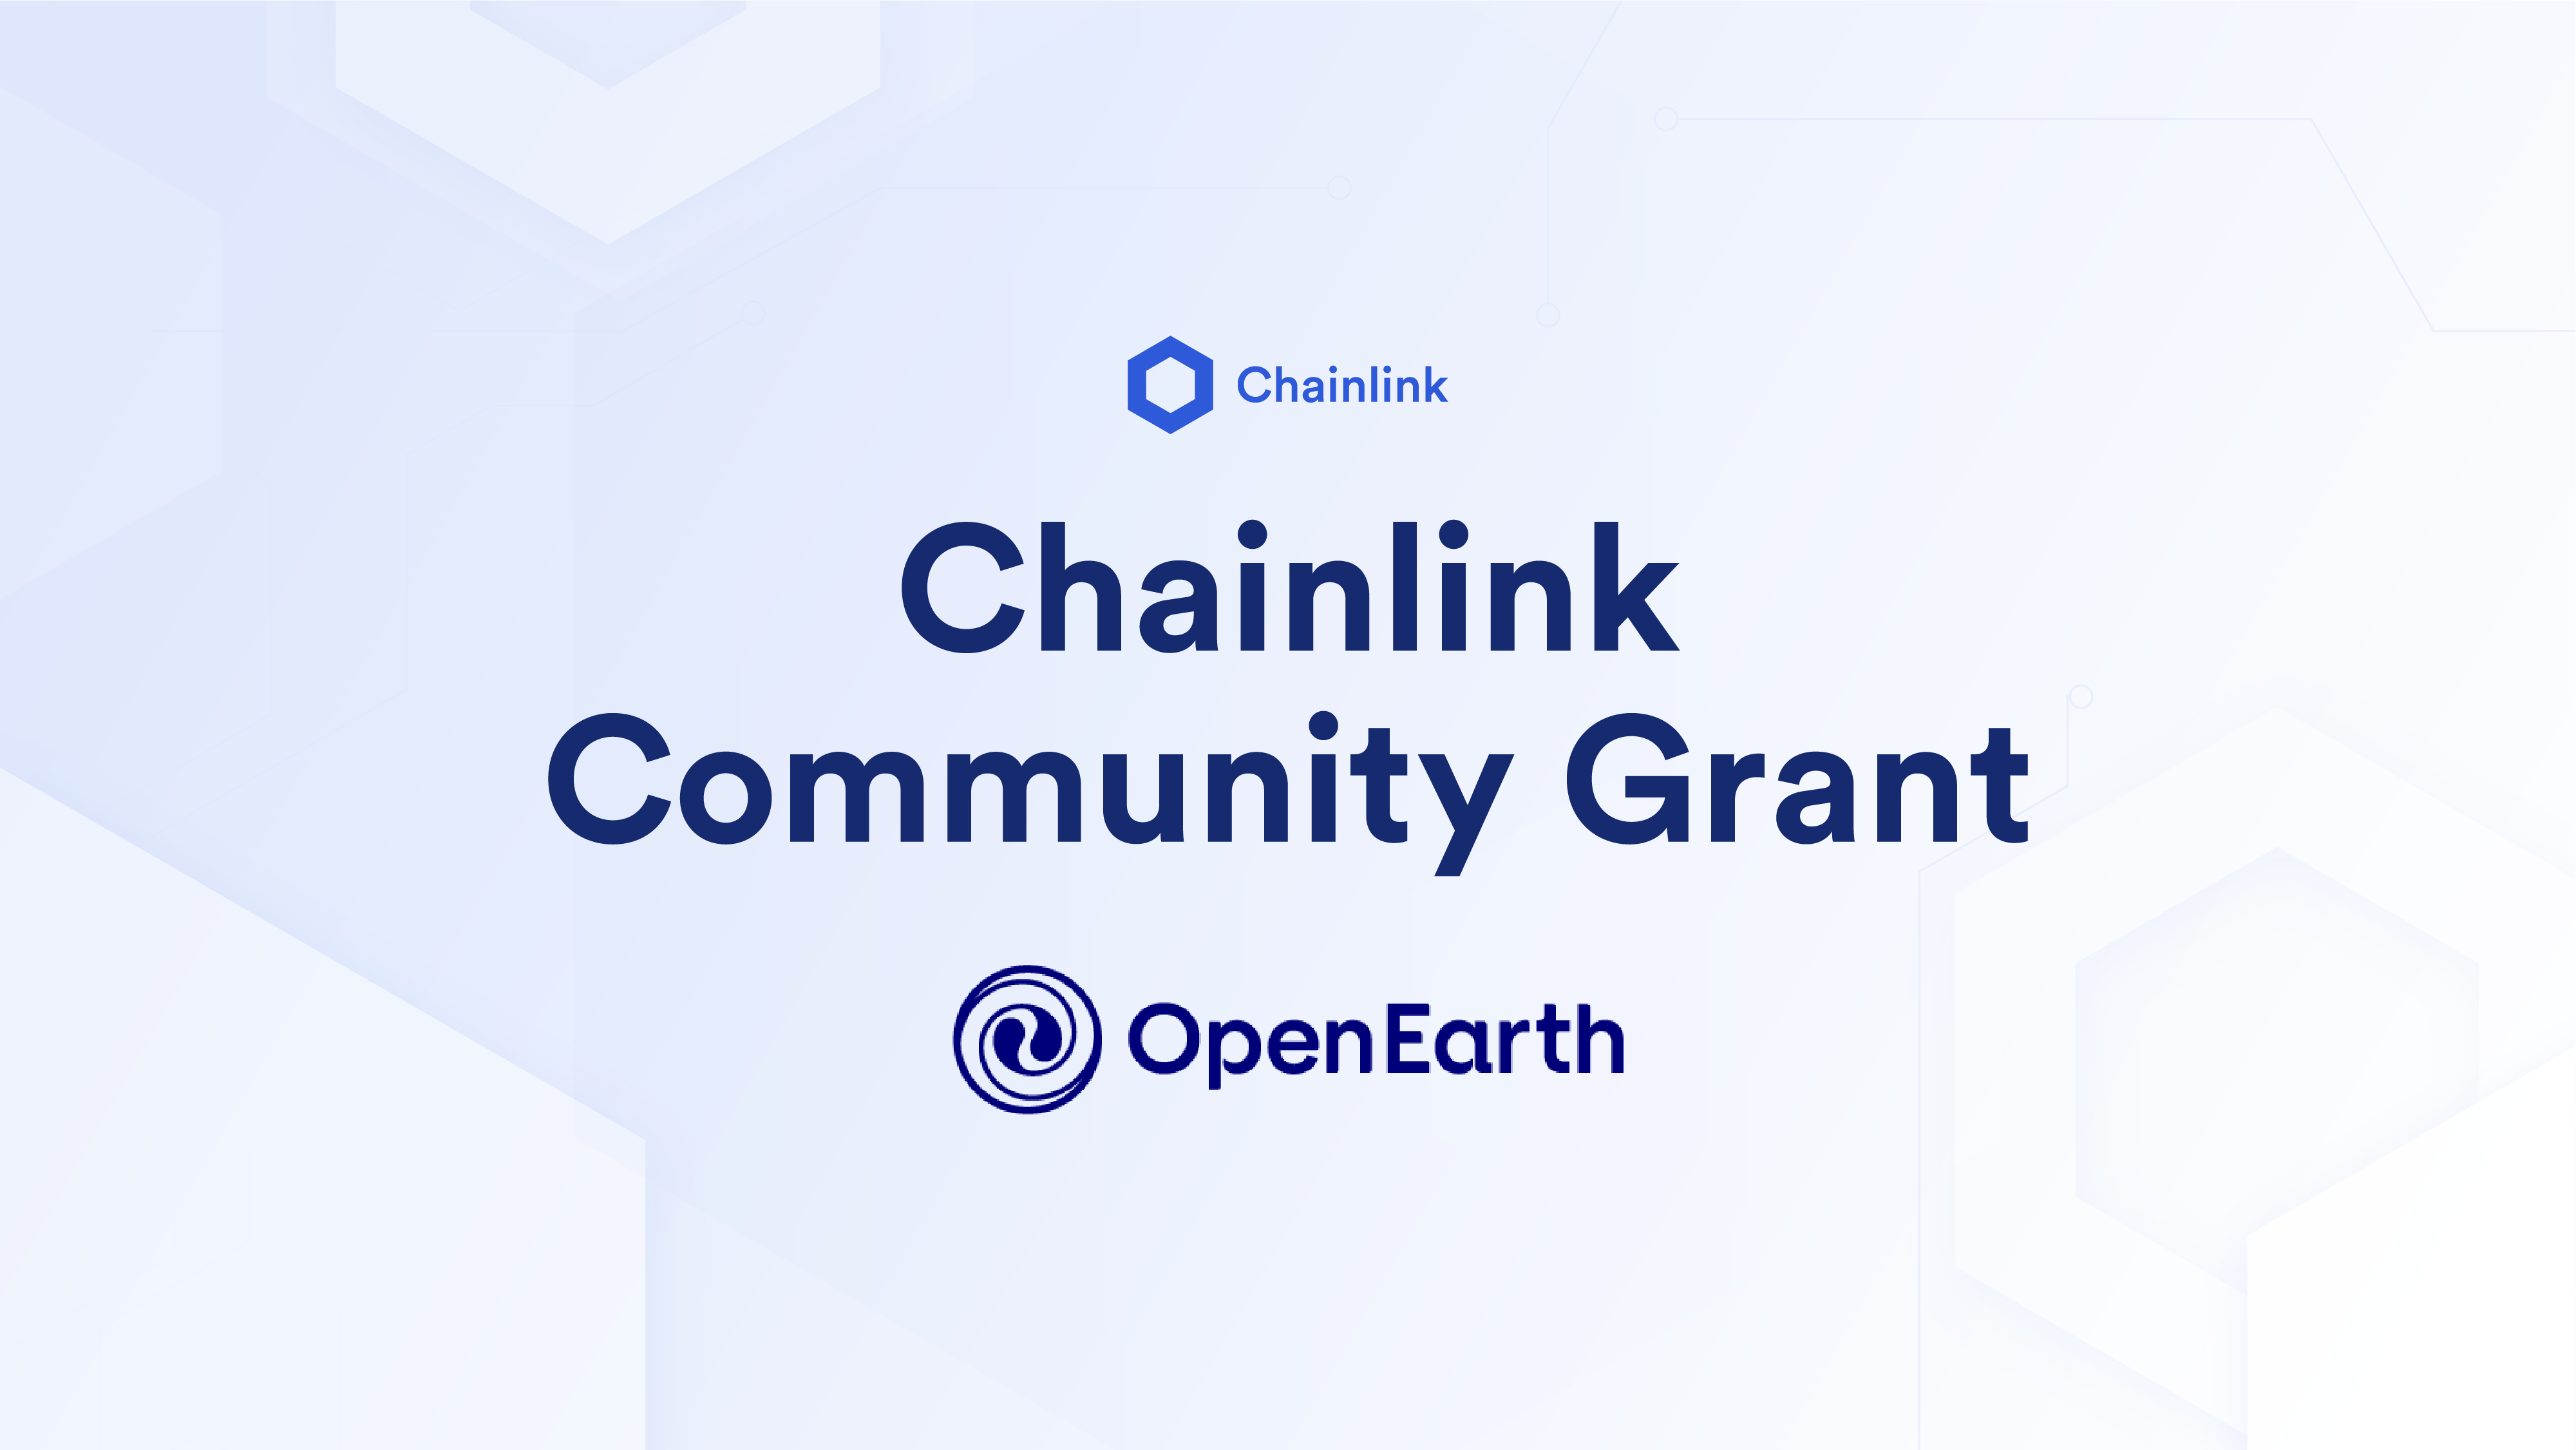 Web3 Foundation on Chainlink Ecosystem | Every Chainlink integration and partnership